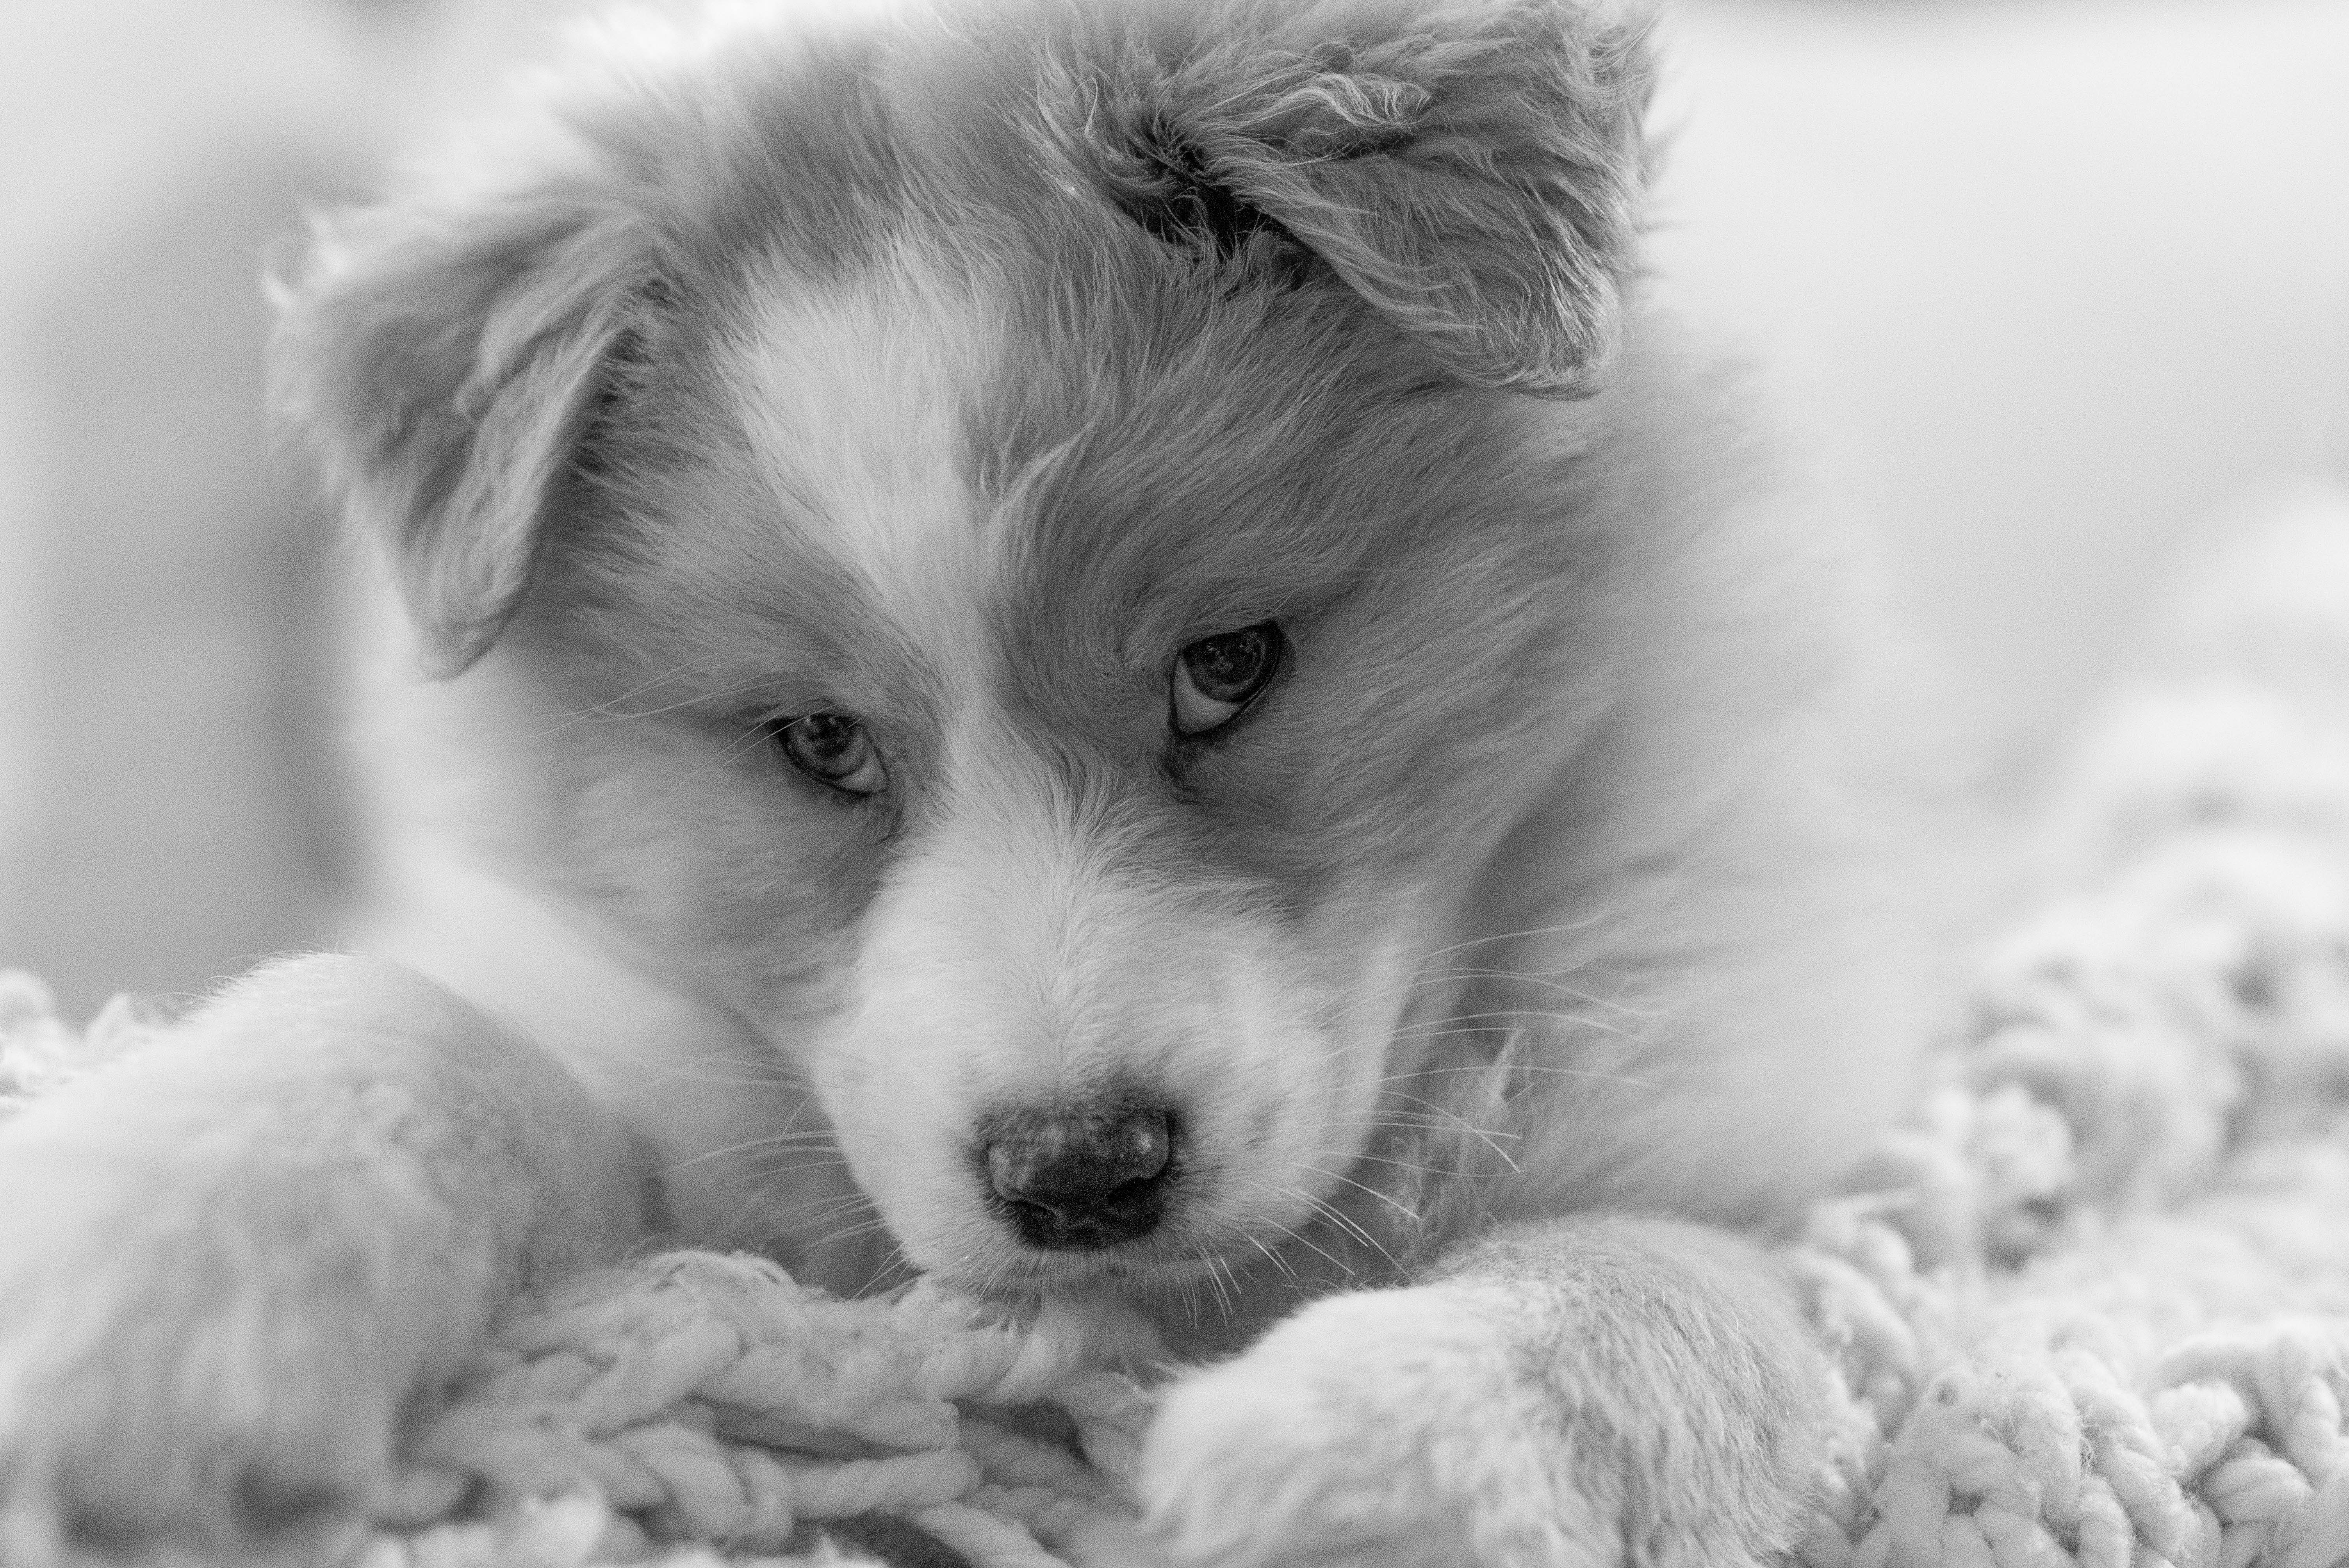 Fly Our New Australian Shepherd Fur-Kid, Sweet Williams Photography, Behind The Lens